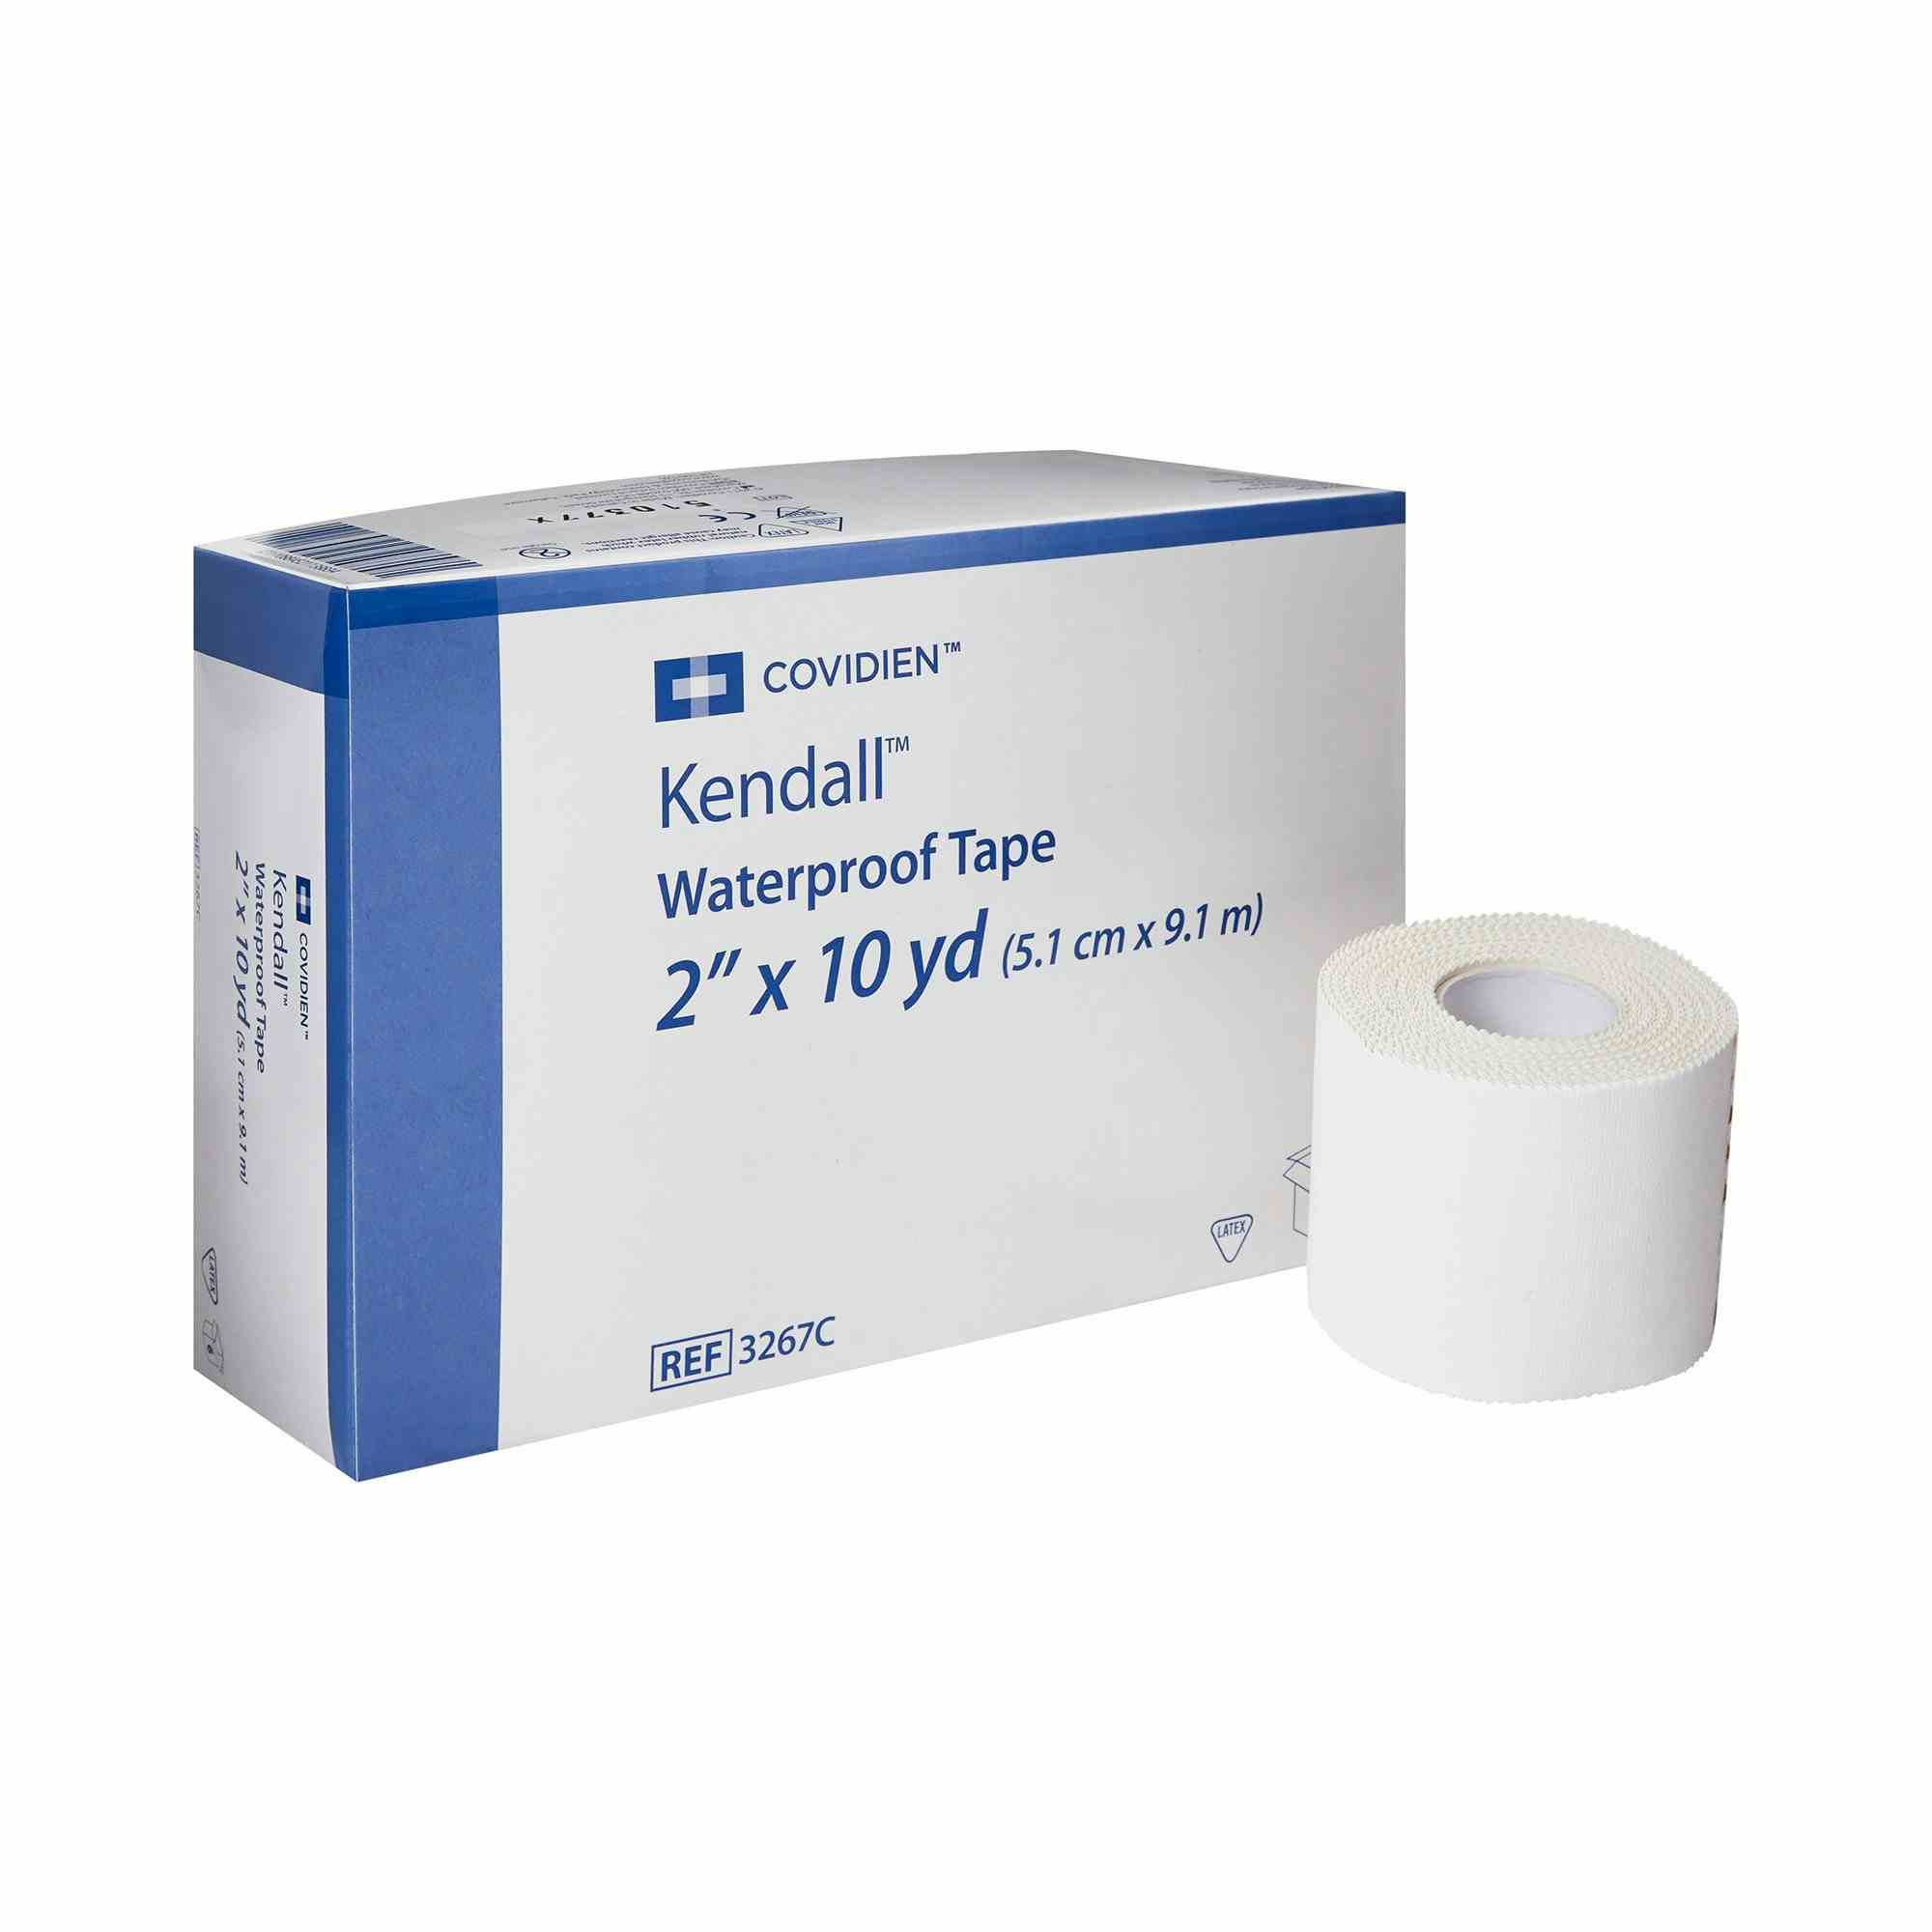 Kendall Medical Tape, 2 Inch x 10 Yard, 3267C, Box of 6